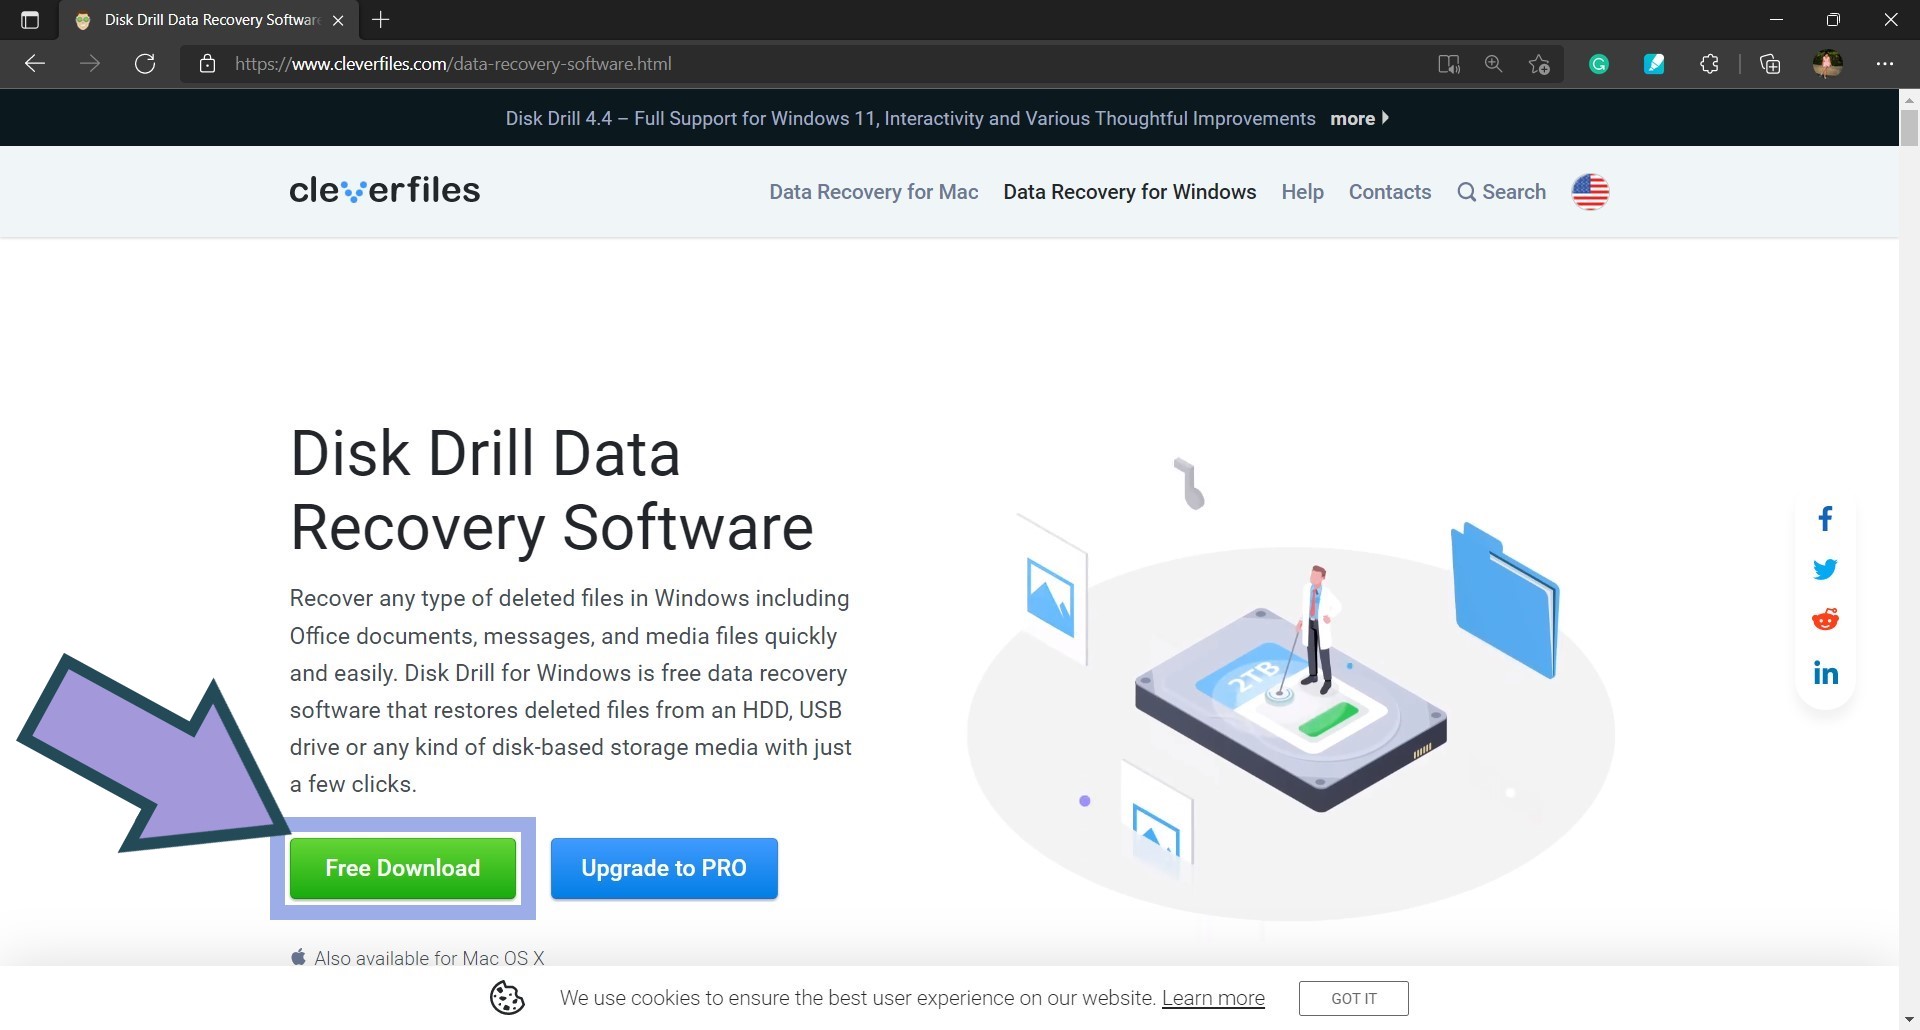 disk drill data recovery software download page